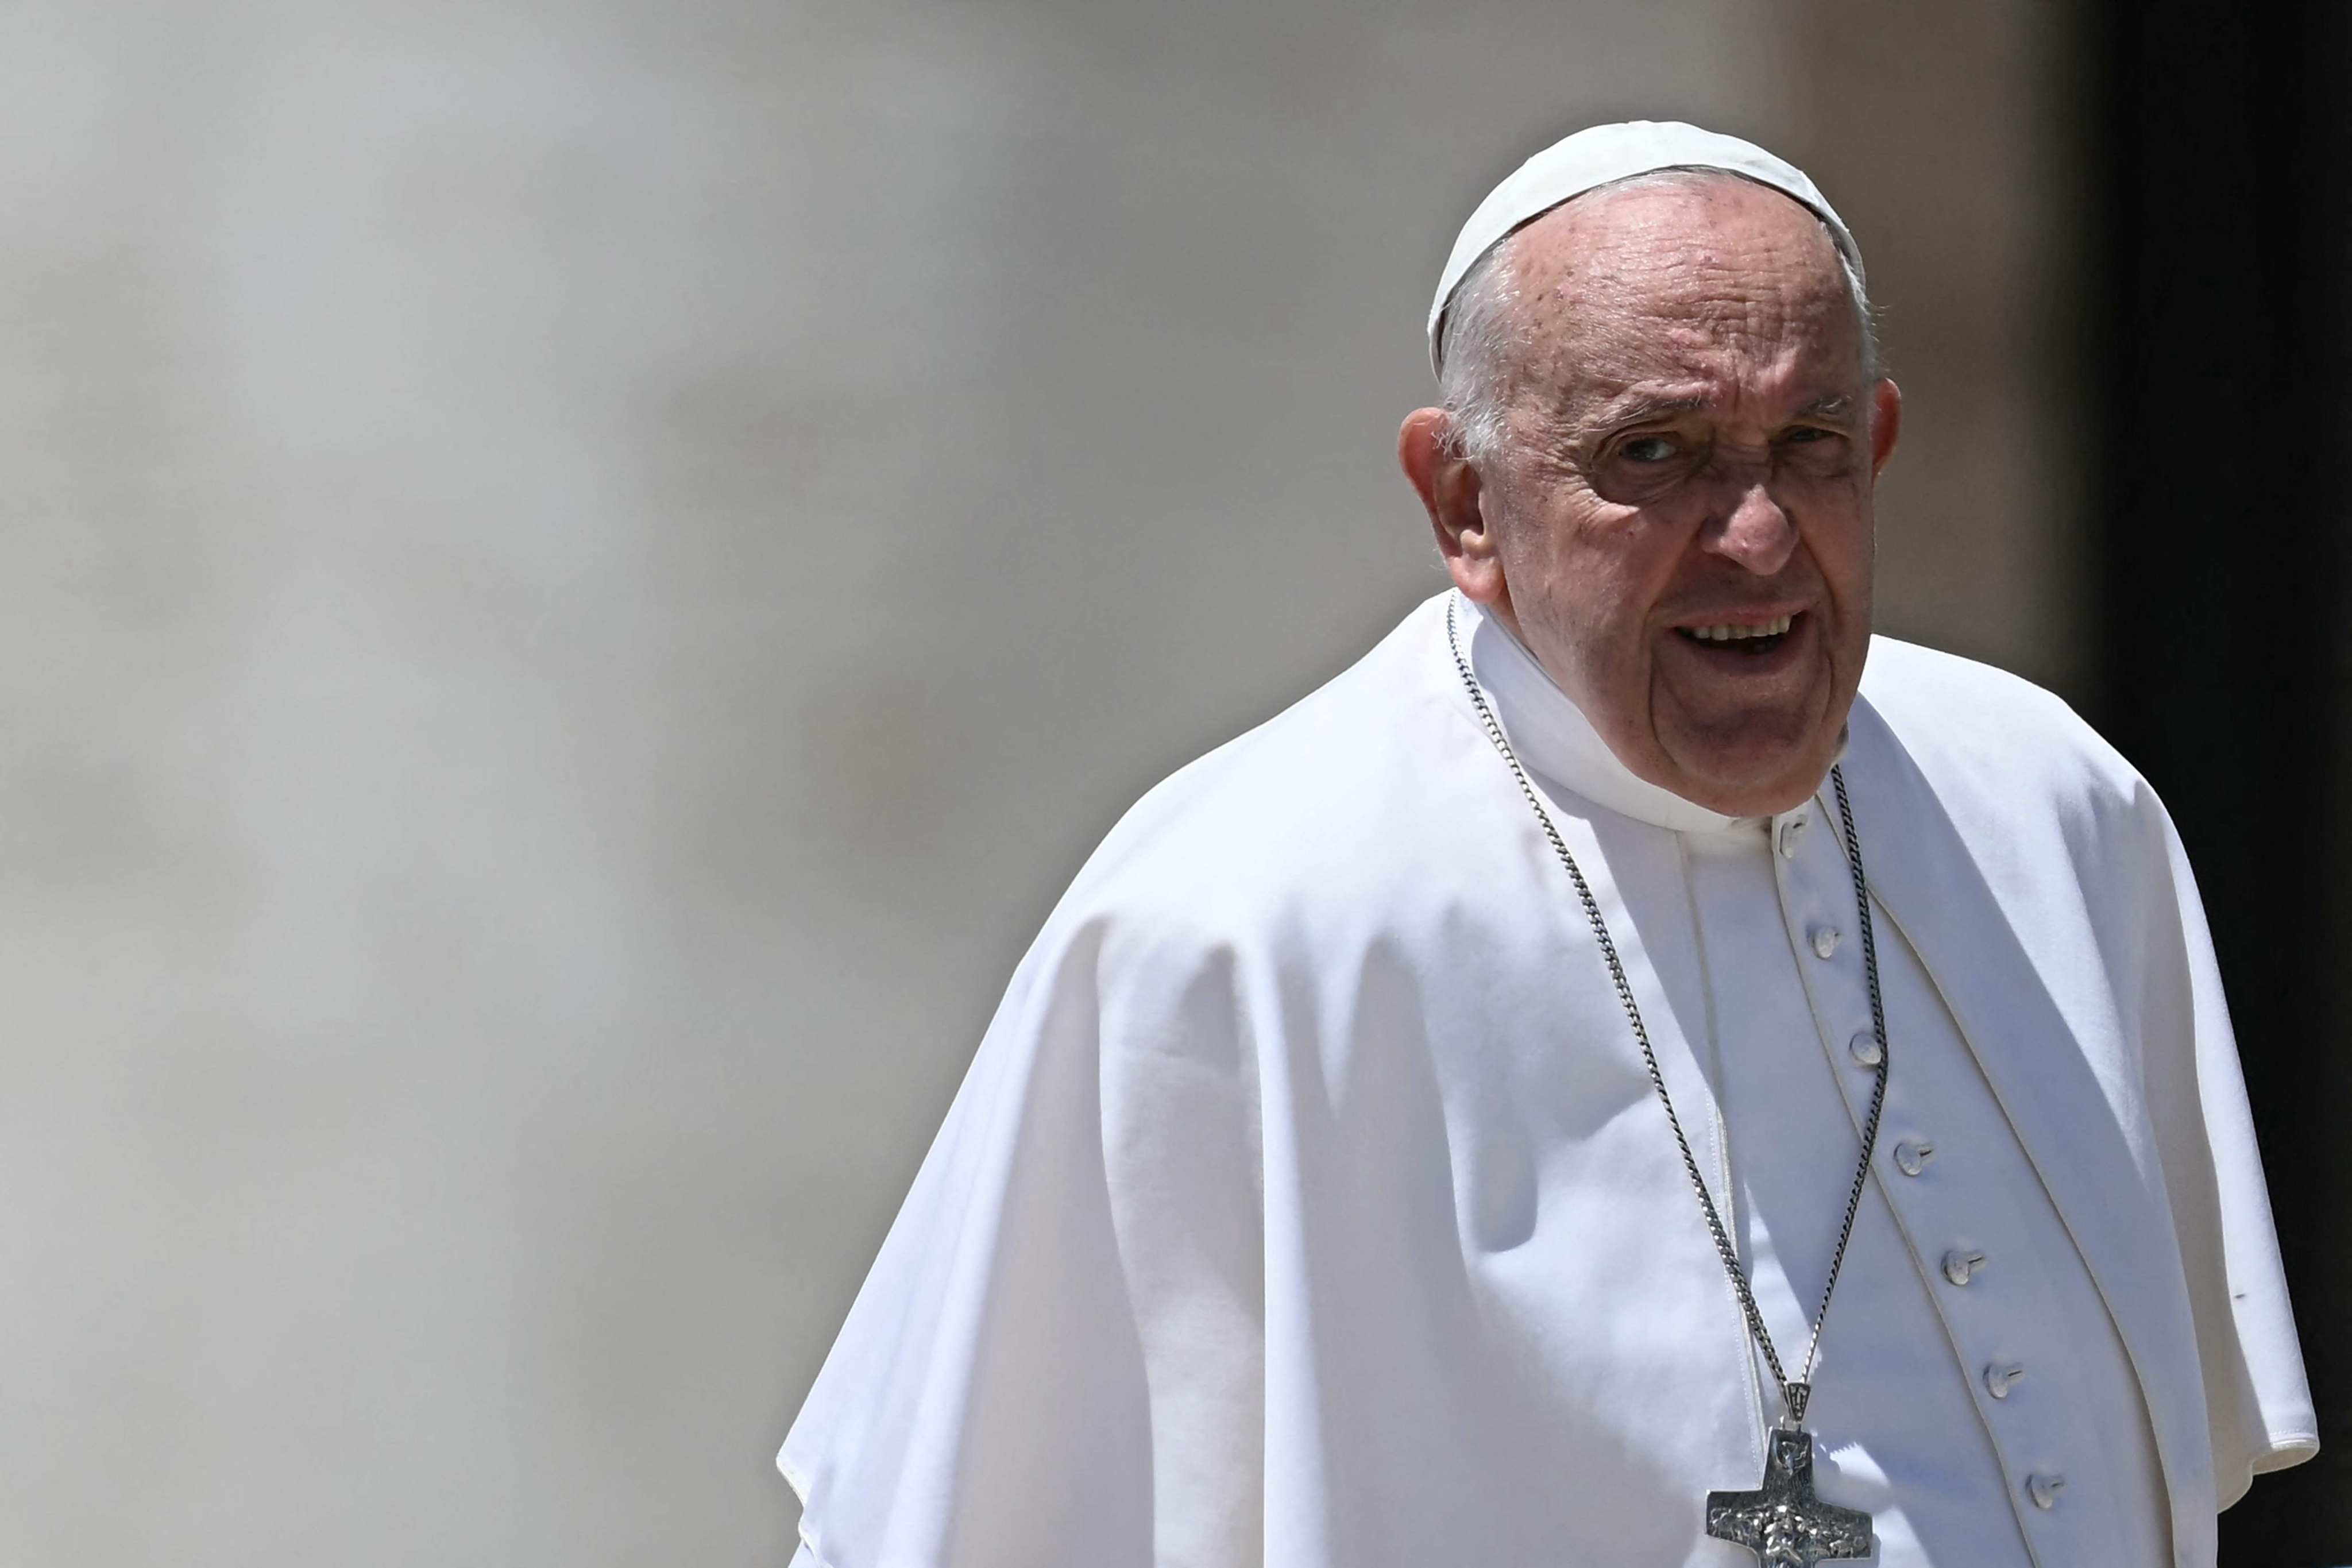 Pope Francis has apologised after being quoted using a vulgar term about gays regarding the church ban on gay priests. Photo: AFP